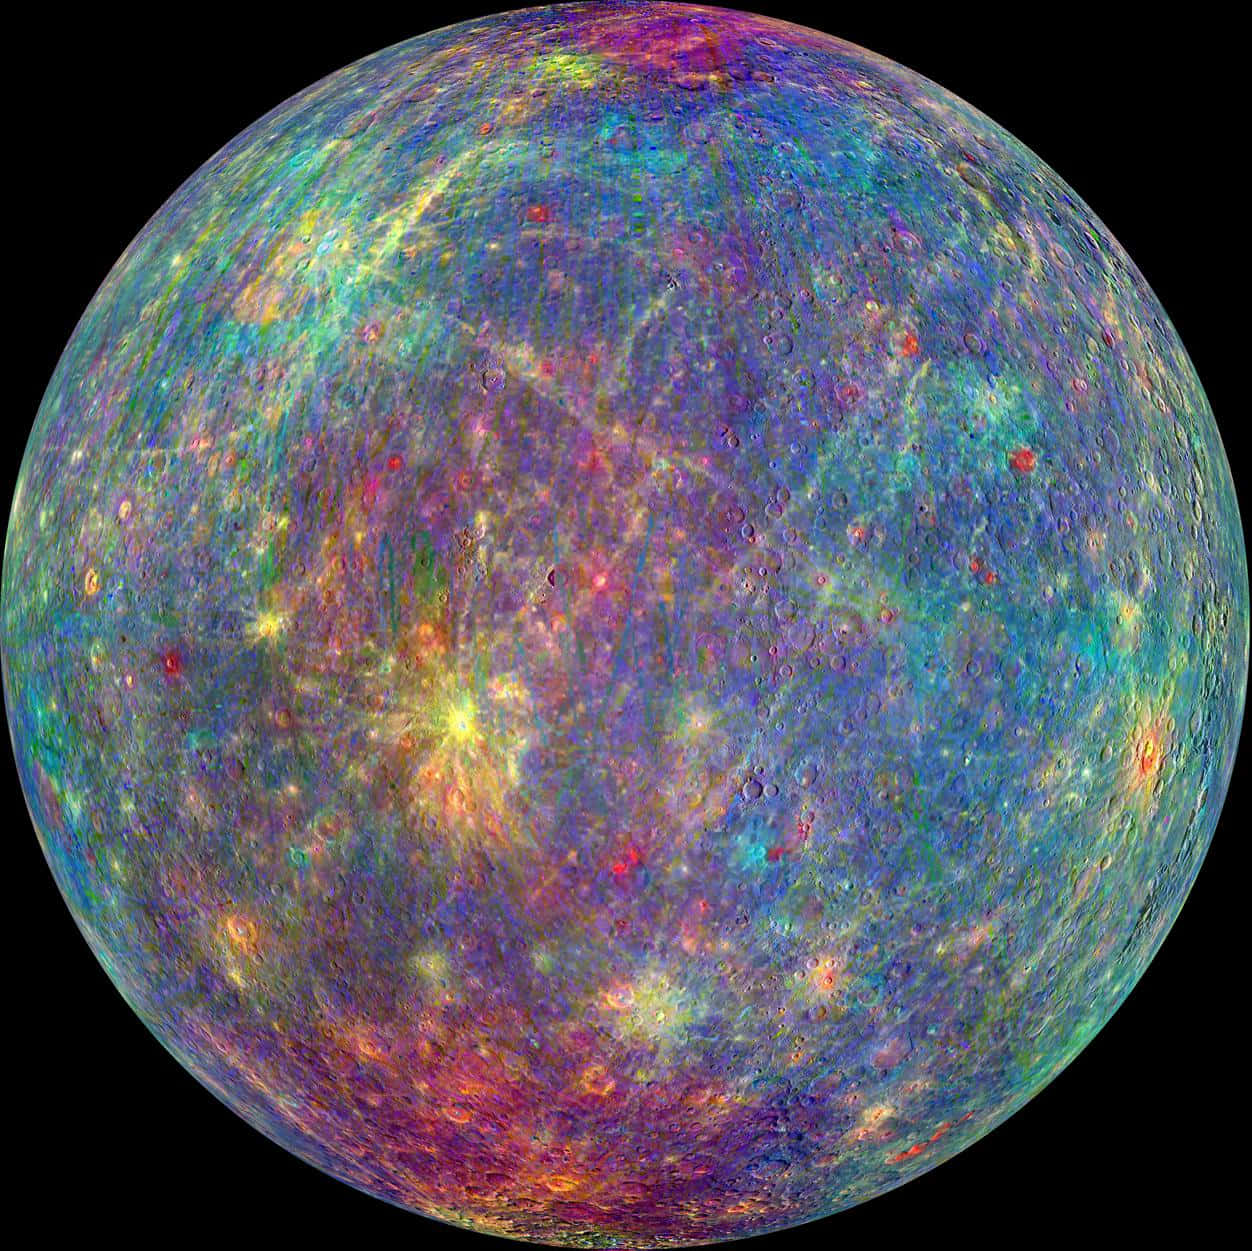 The dazzling planet Mercury in all its glory